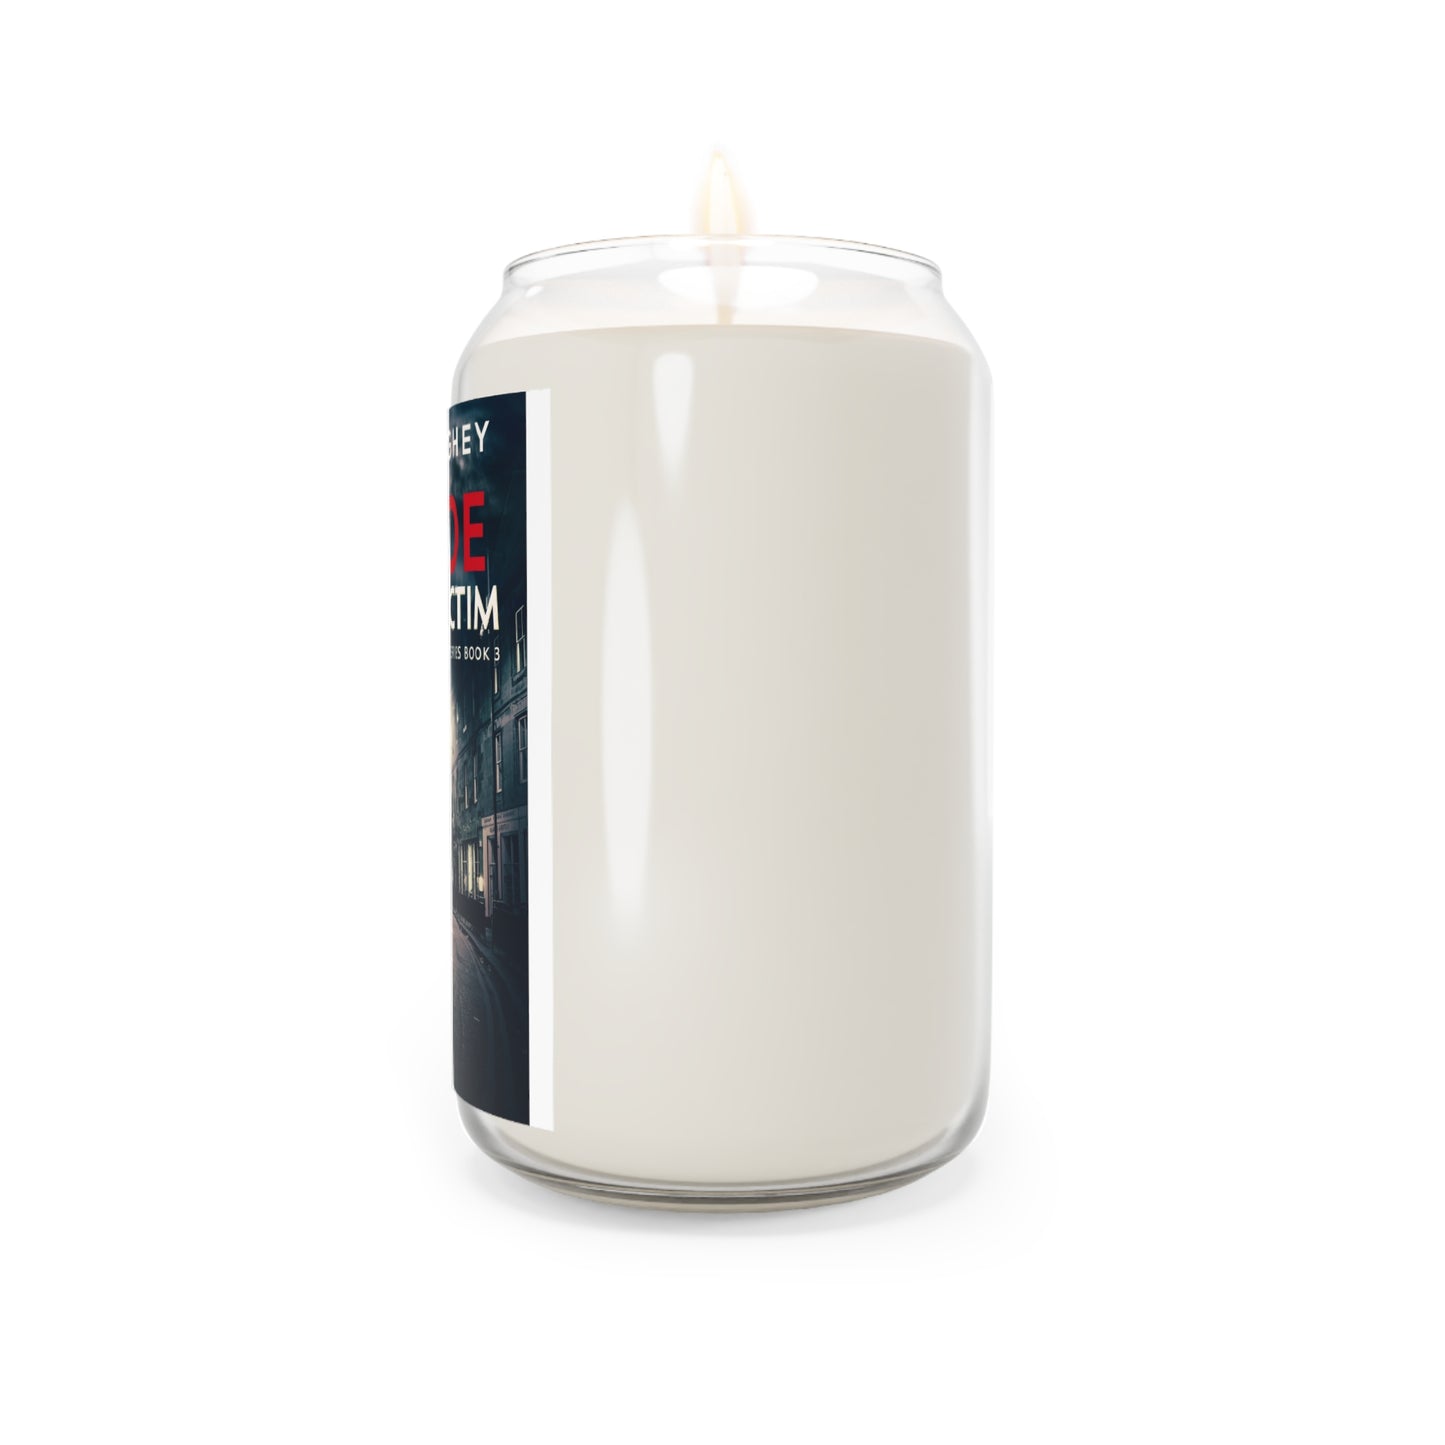 Chloe - Prime Victim - Scented Candle